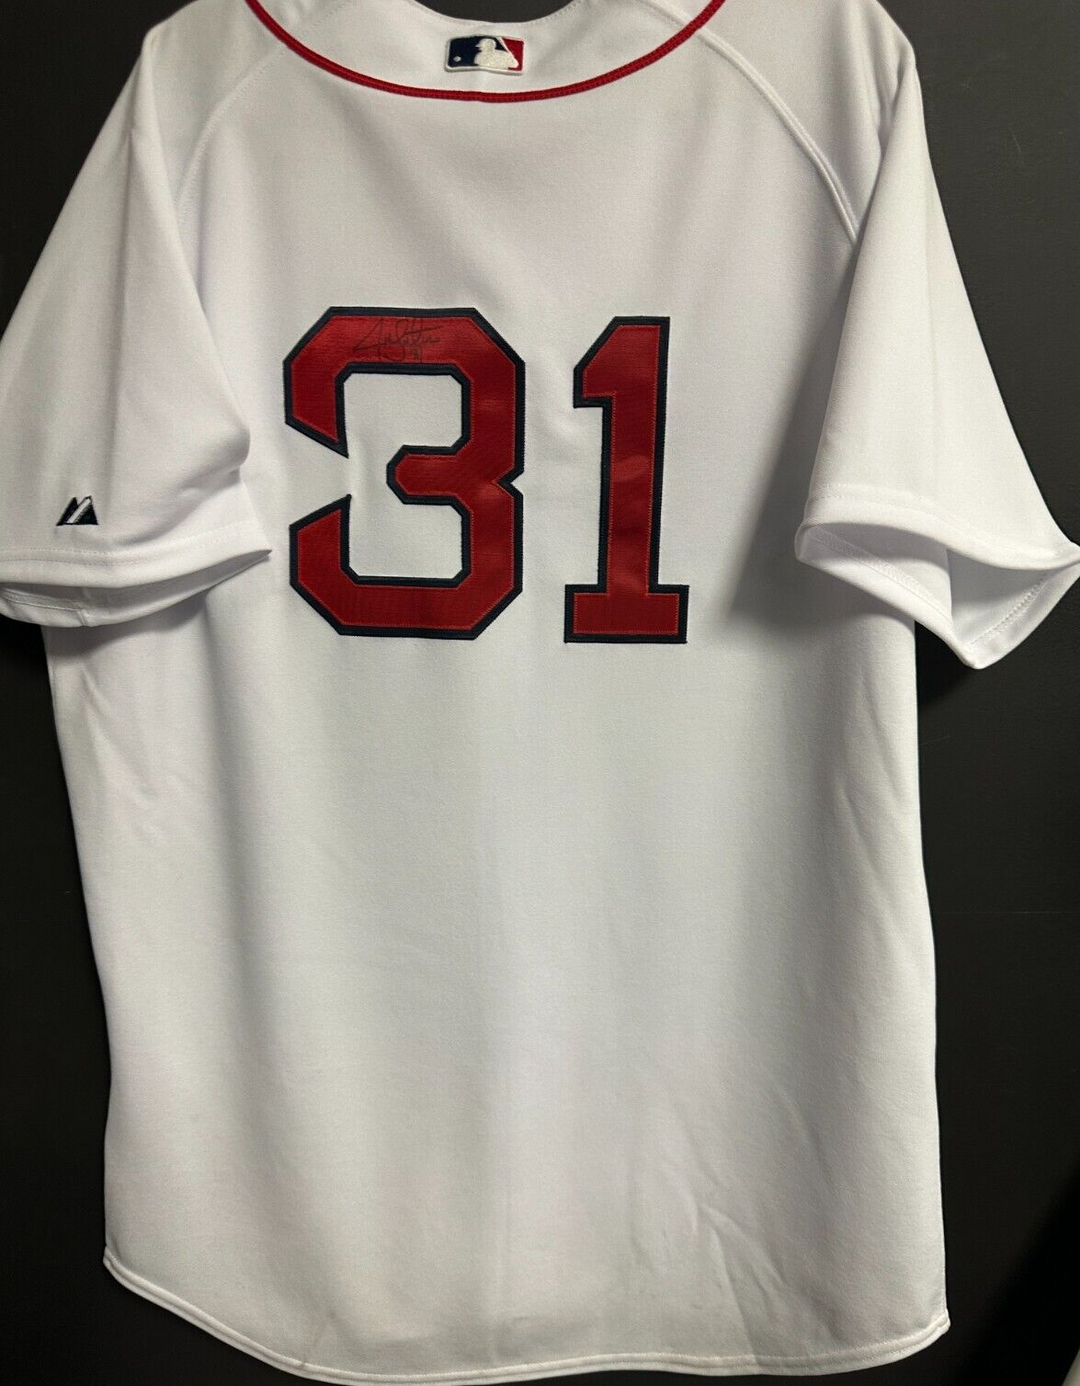 Jon Lester Autographed Authentic Boston Red Sox Home White Jersey MAB Hologram